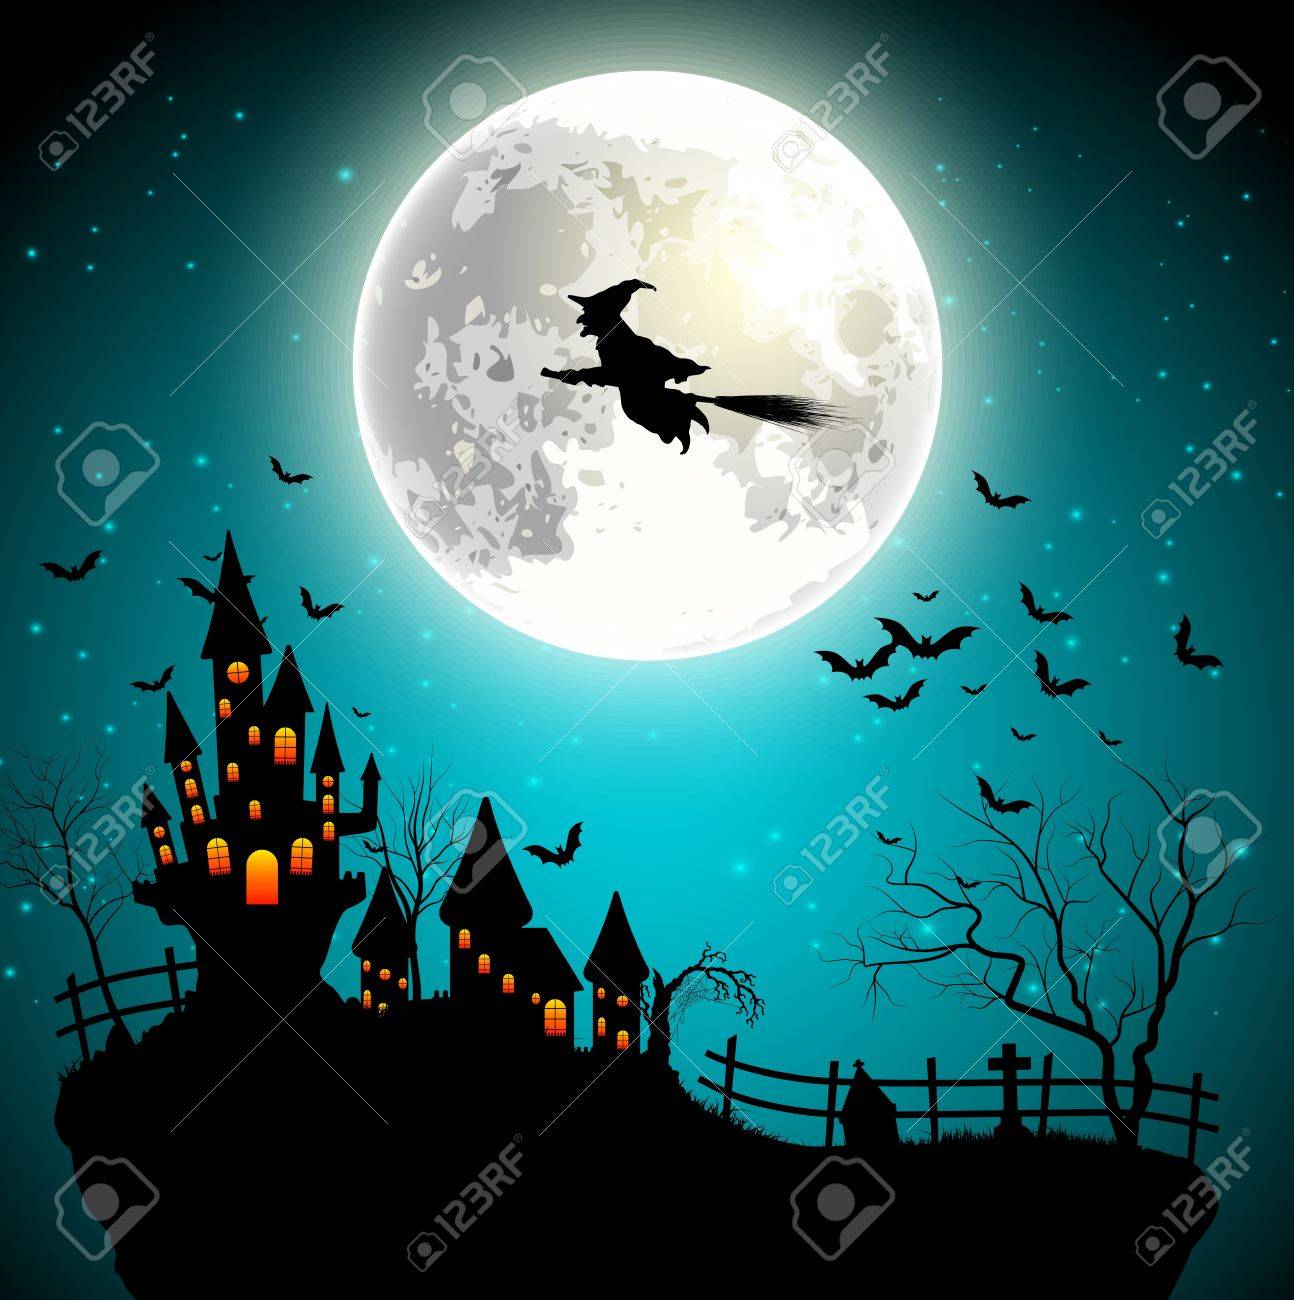 Halloween Background With Flying Witch On The Full Moon Royalty